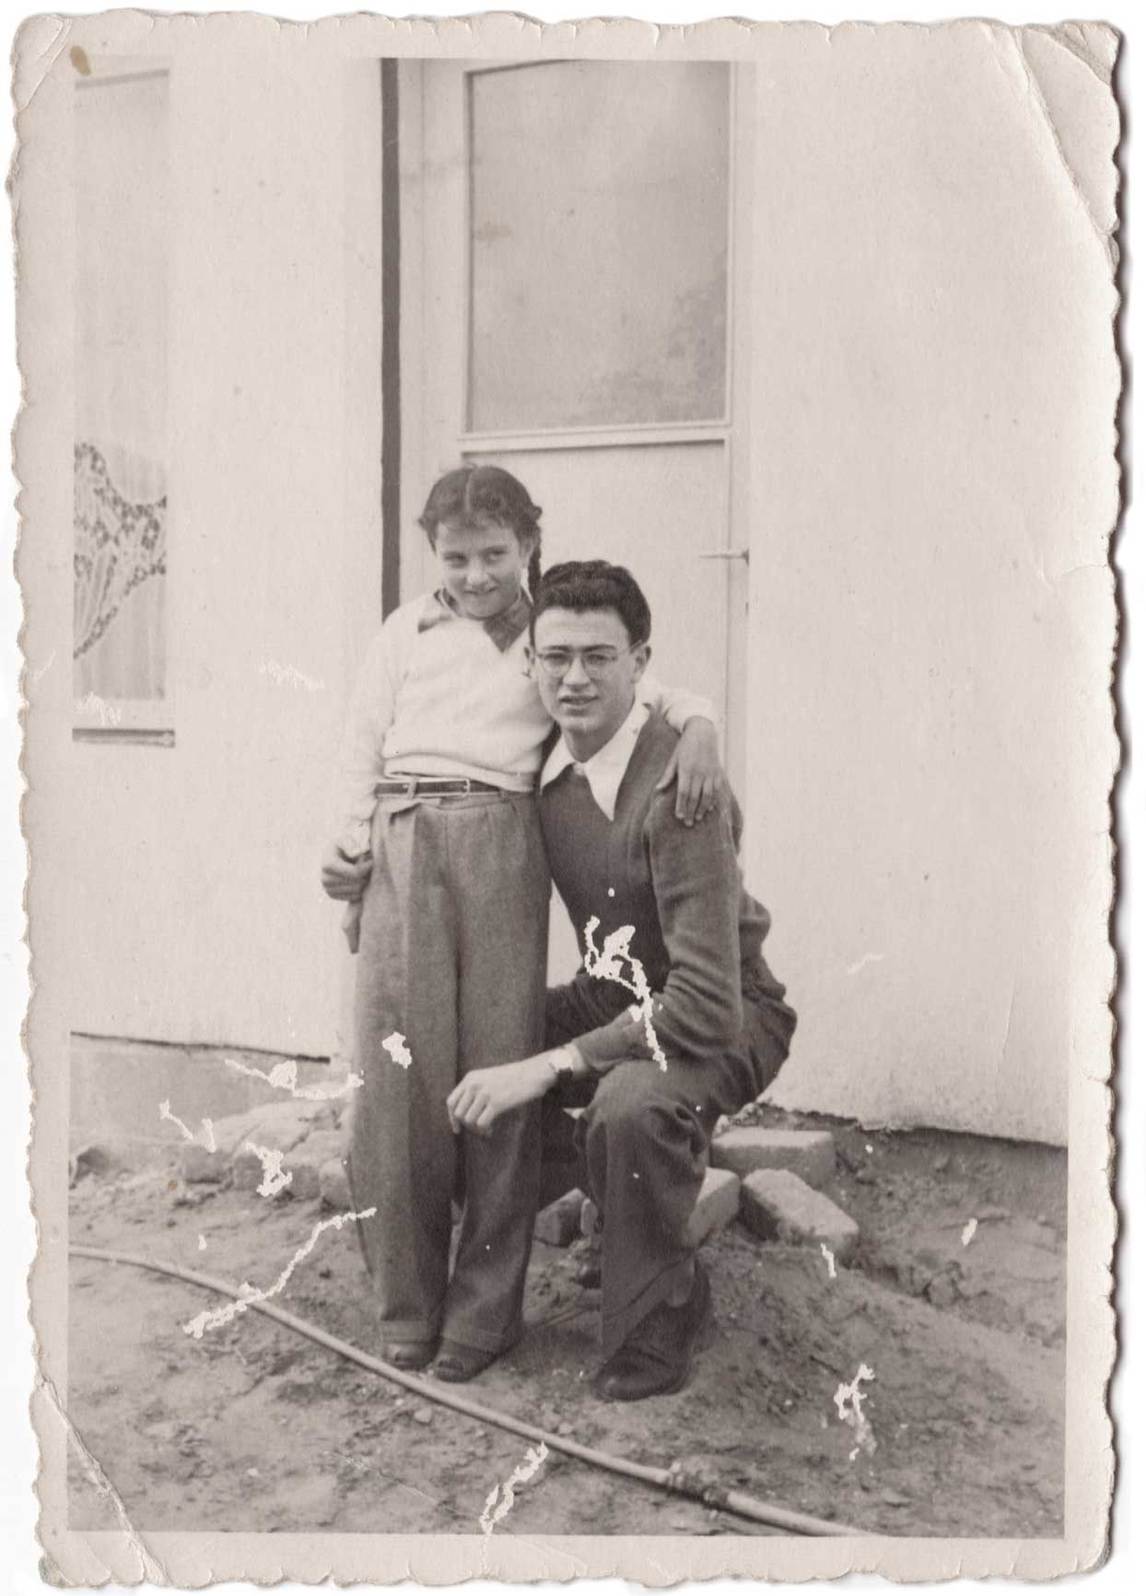 Zipora and Sorel in front of family store in Israel, c.1952